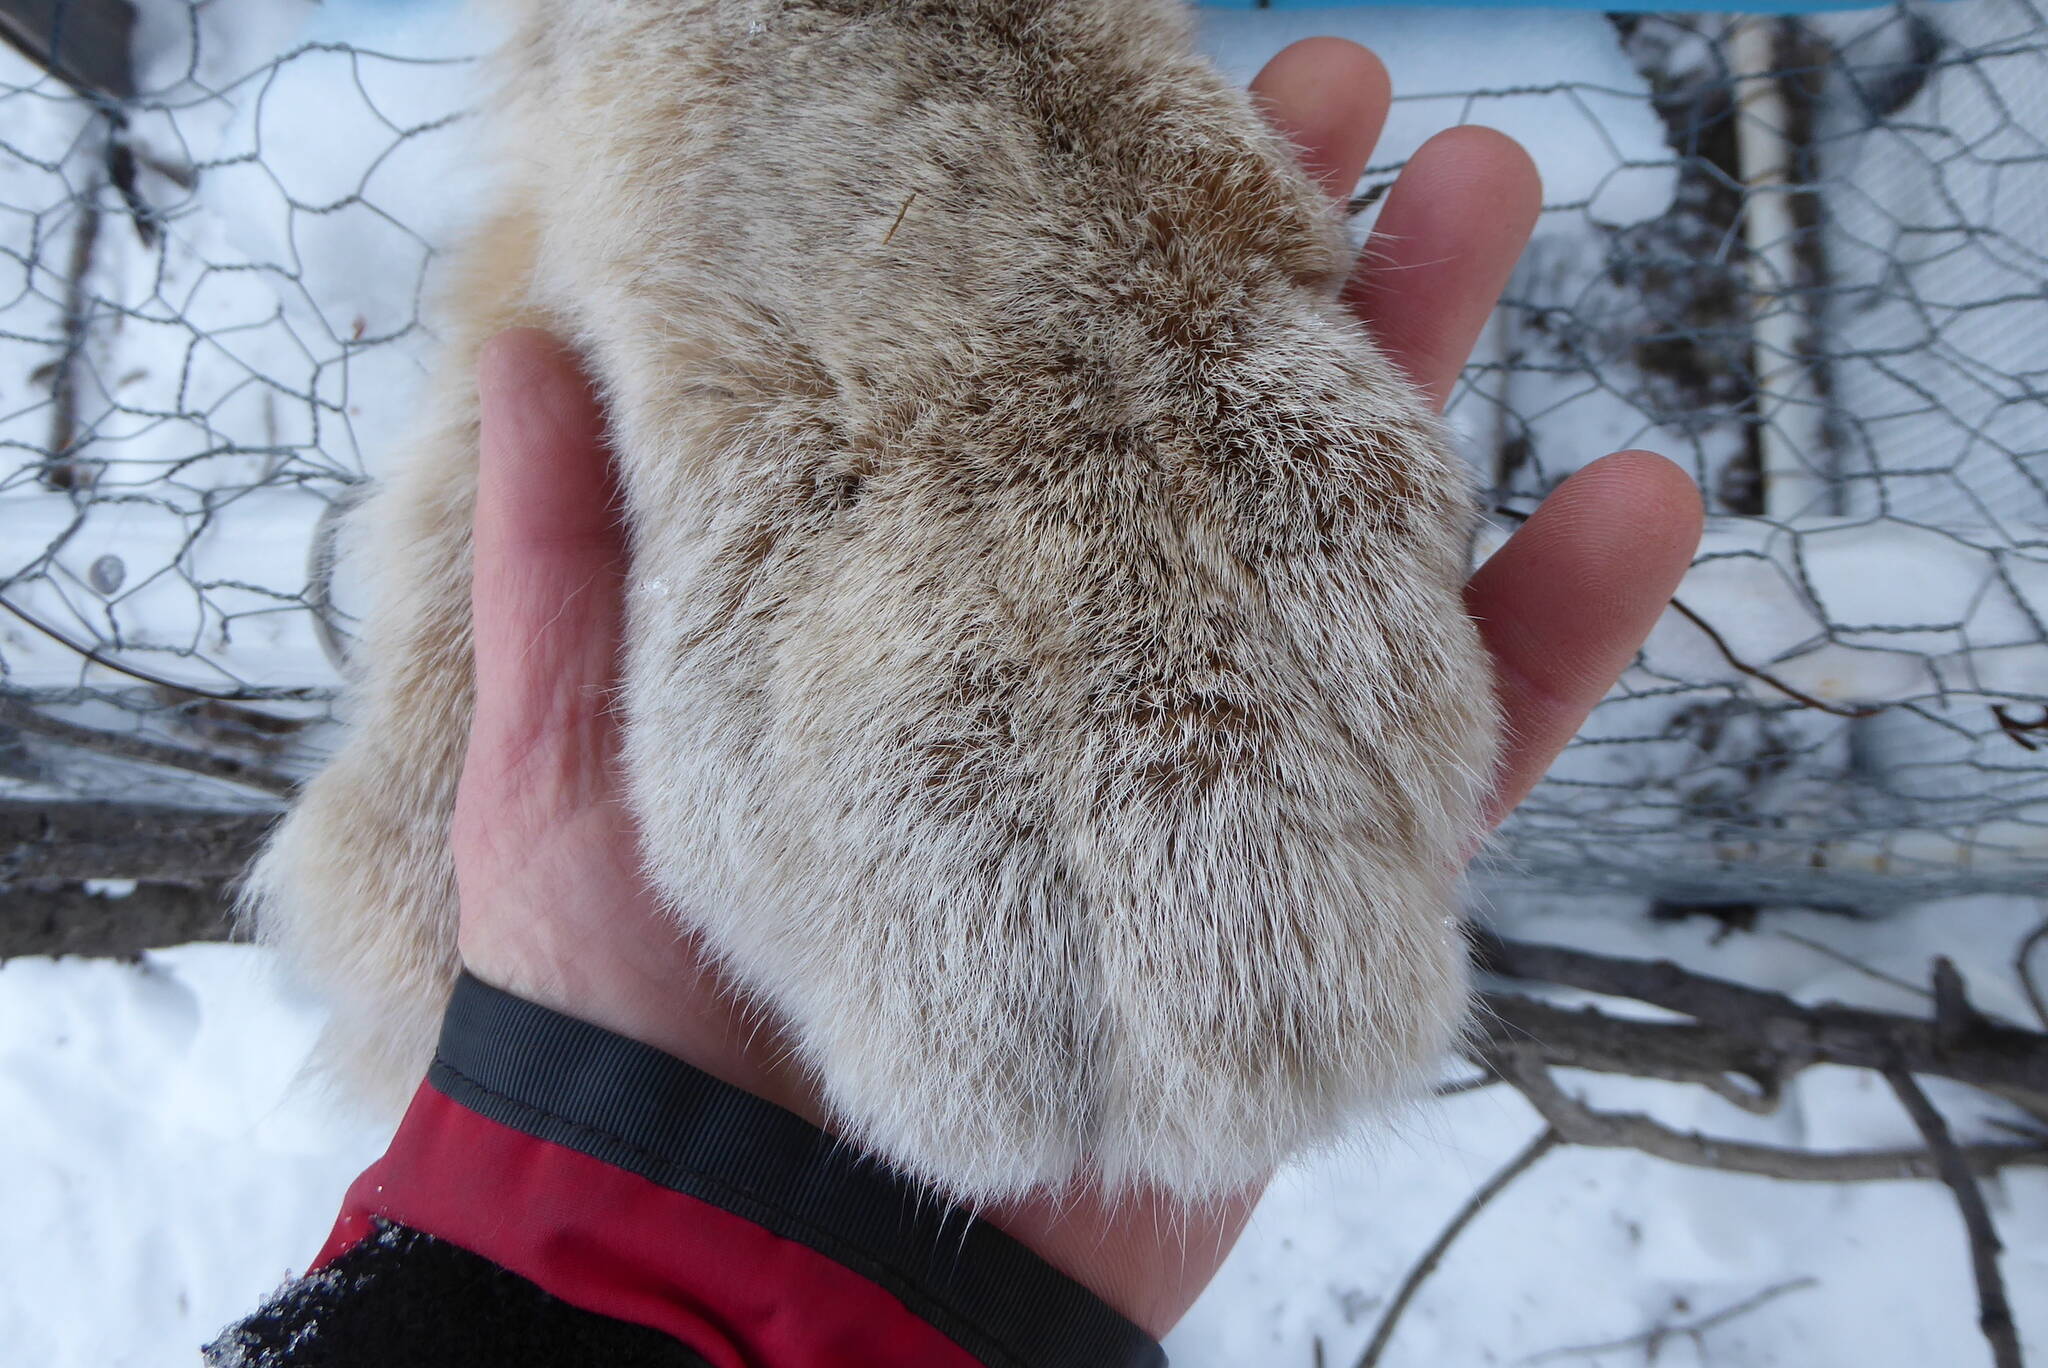 The paw of an anesthetized female lynx trapped north of the Arctic Circle that weighed 22 pounds. (Courtesy Photo / Ned Rozell)